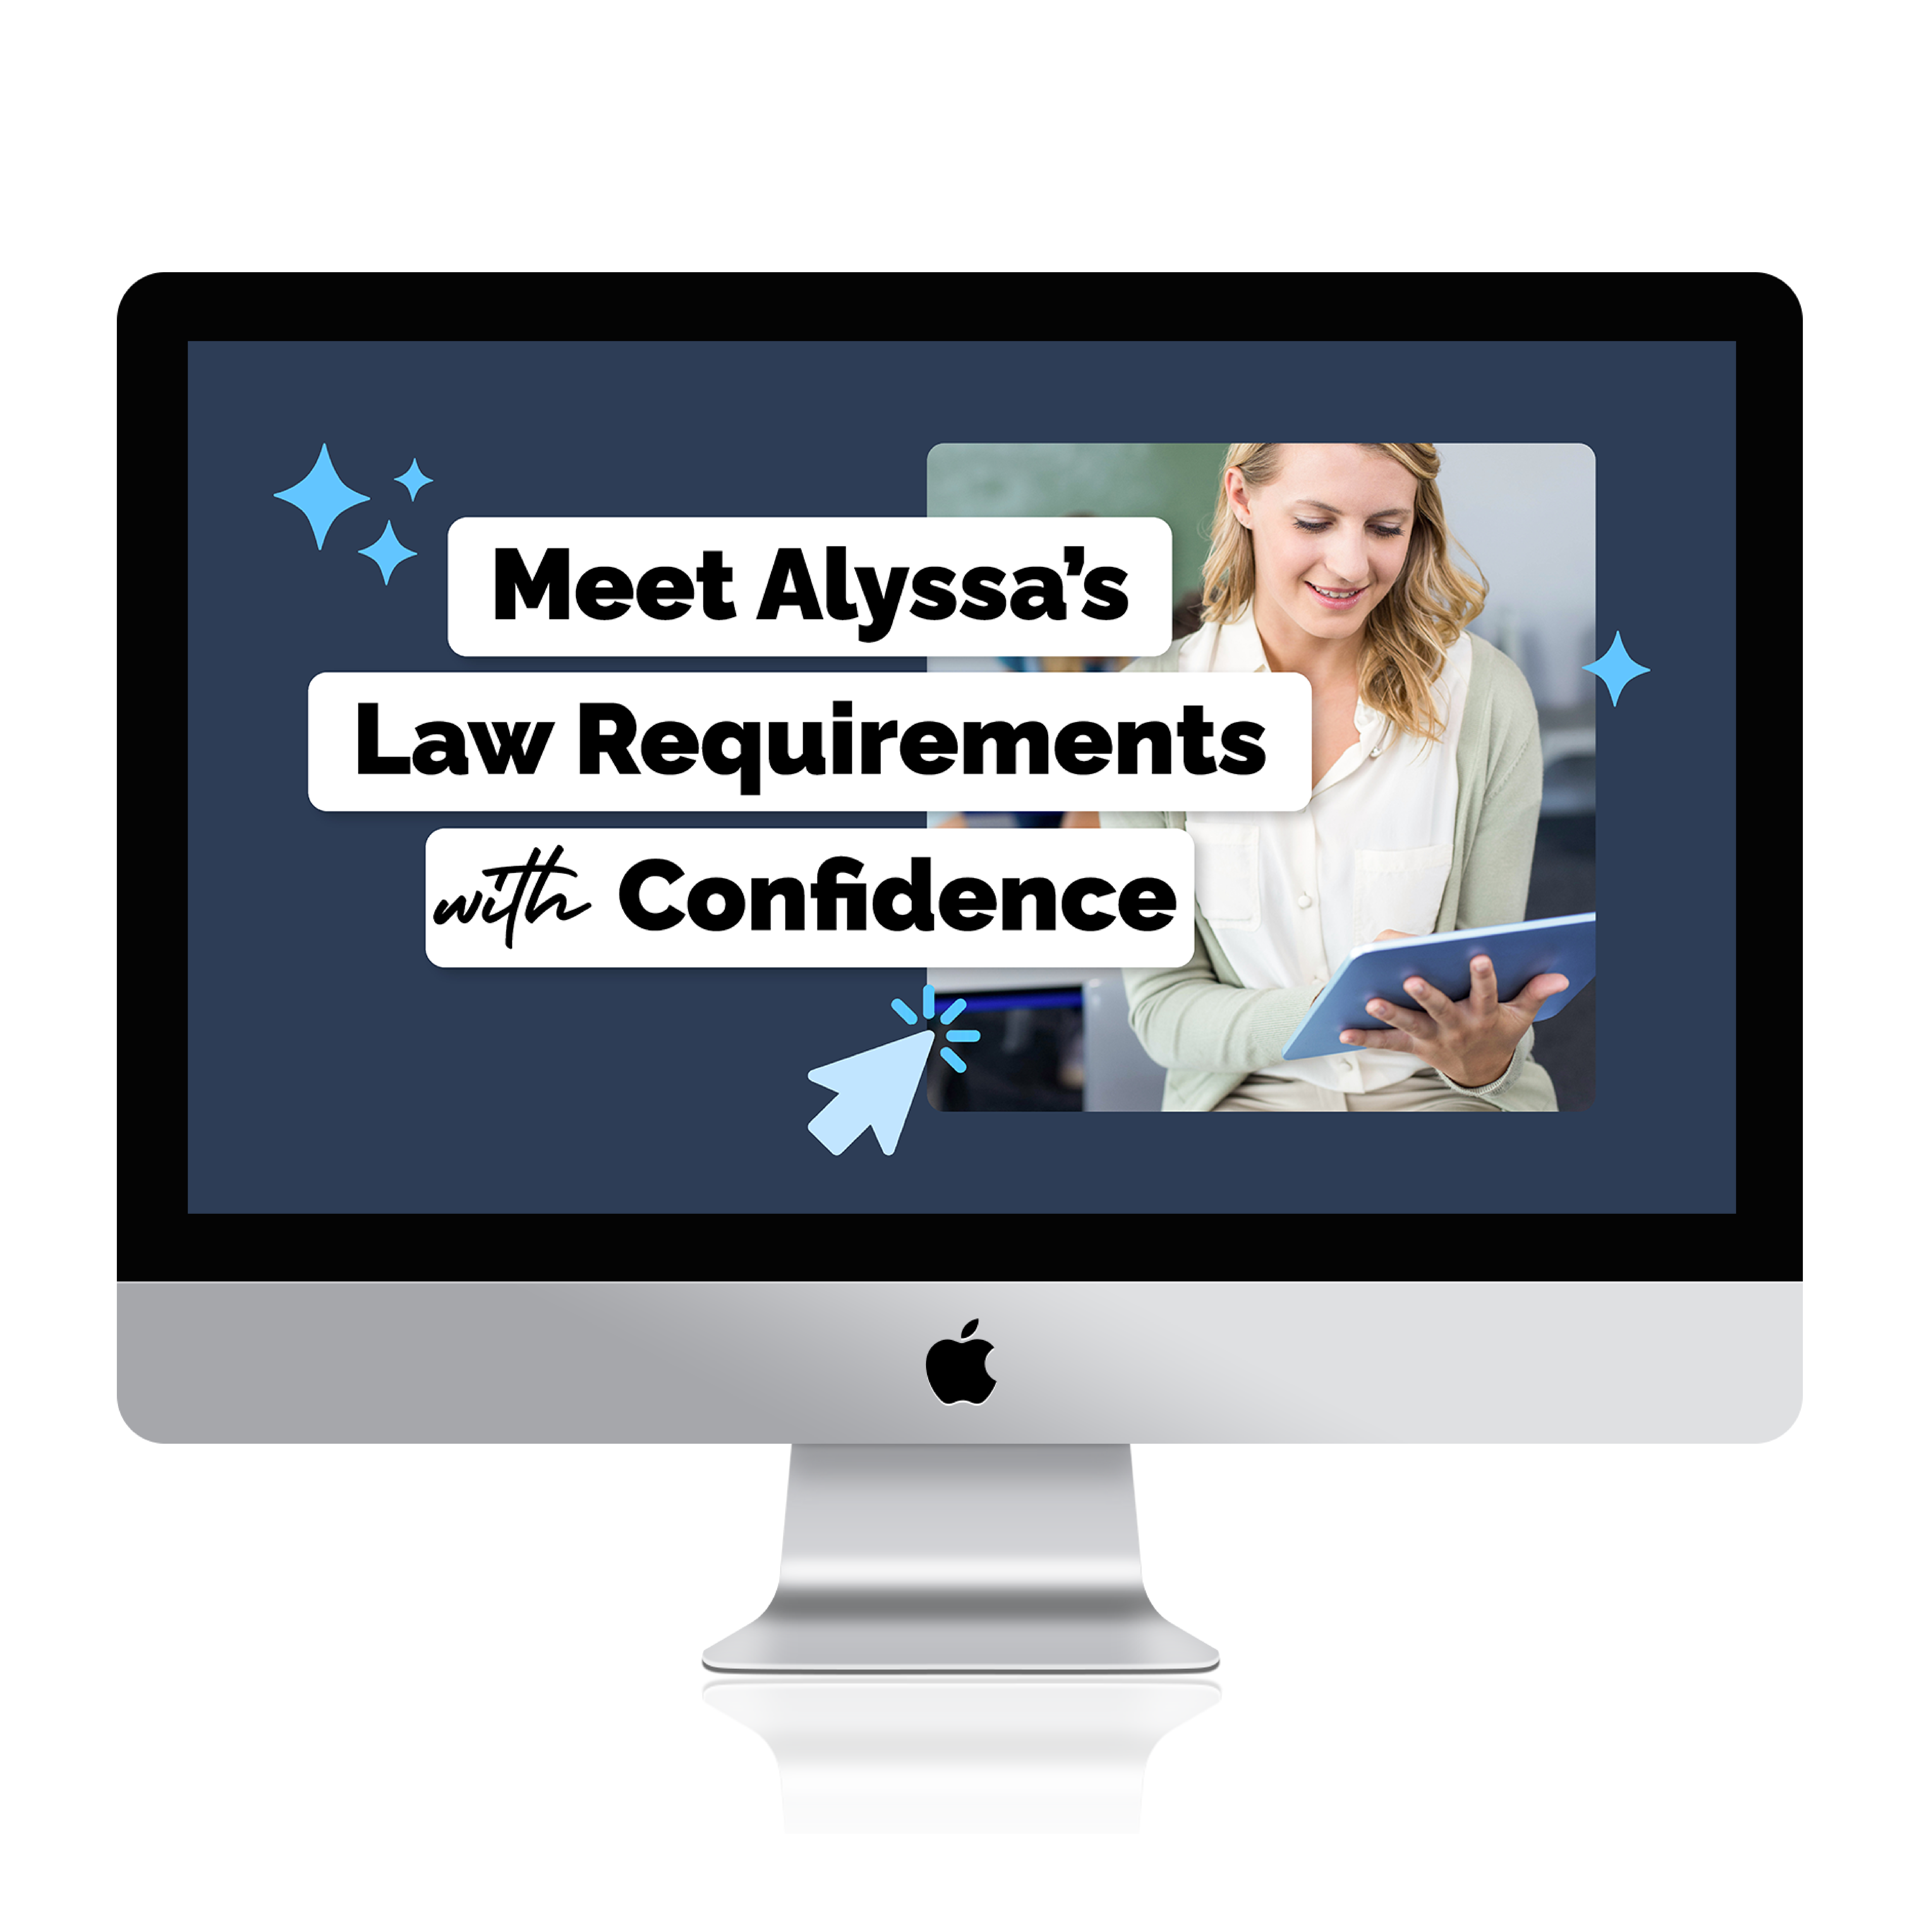 Meet Alyssa's Law Requirements with Confidence